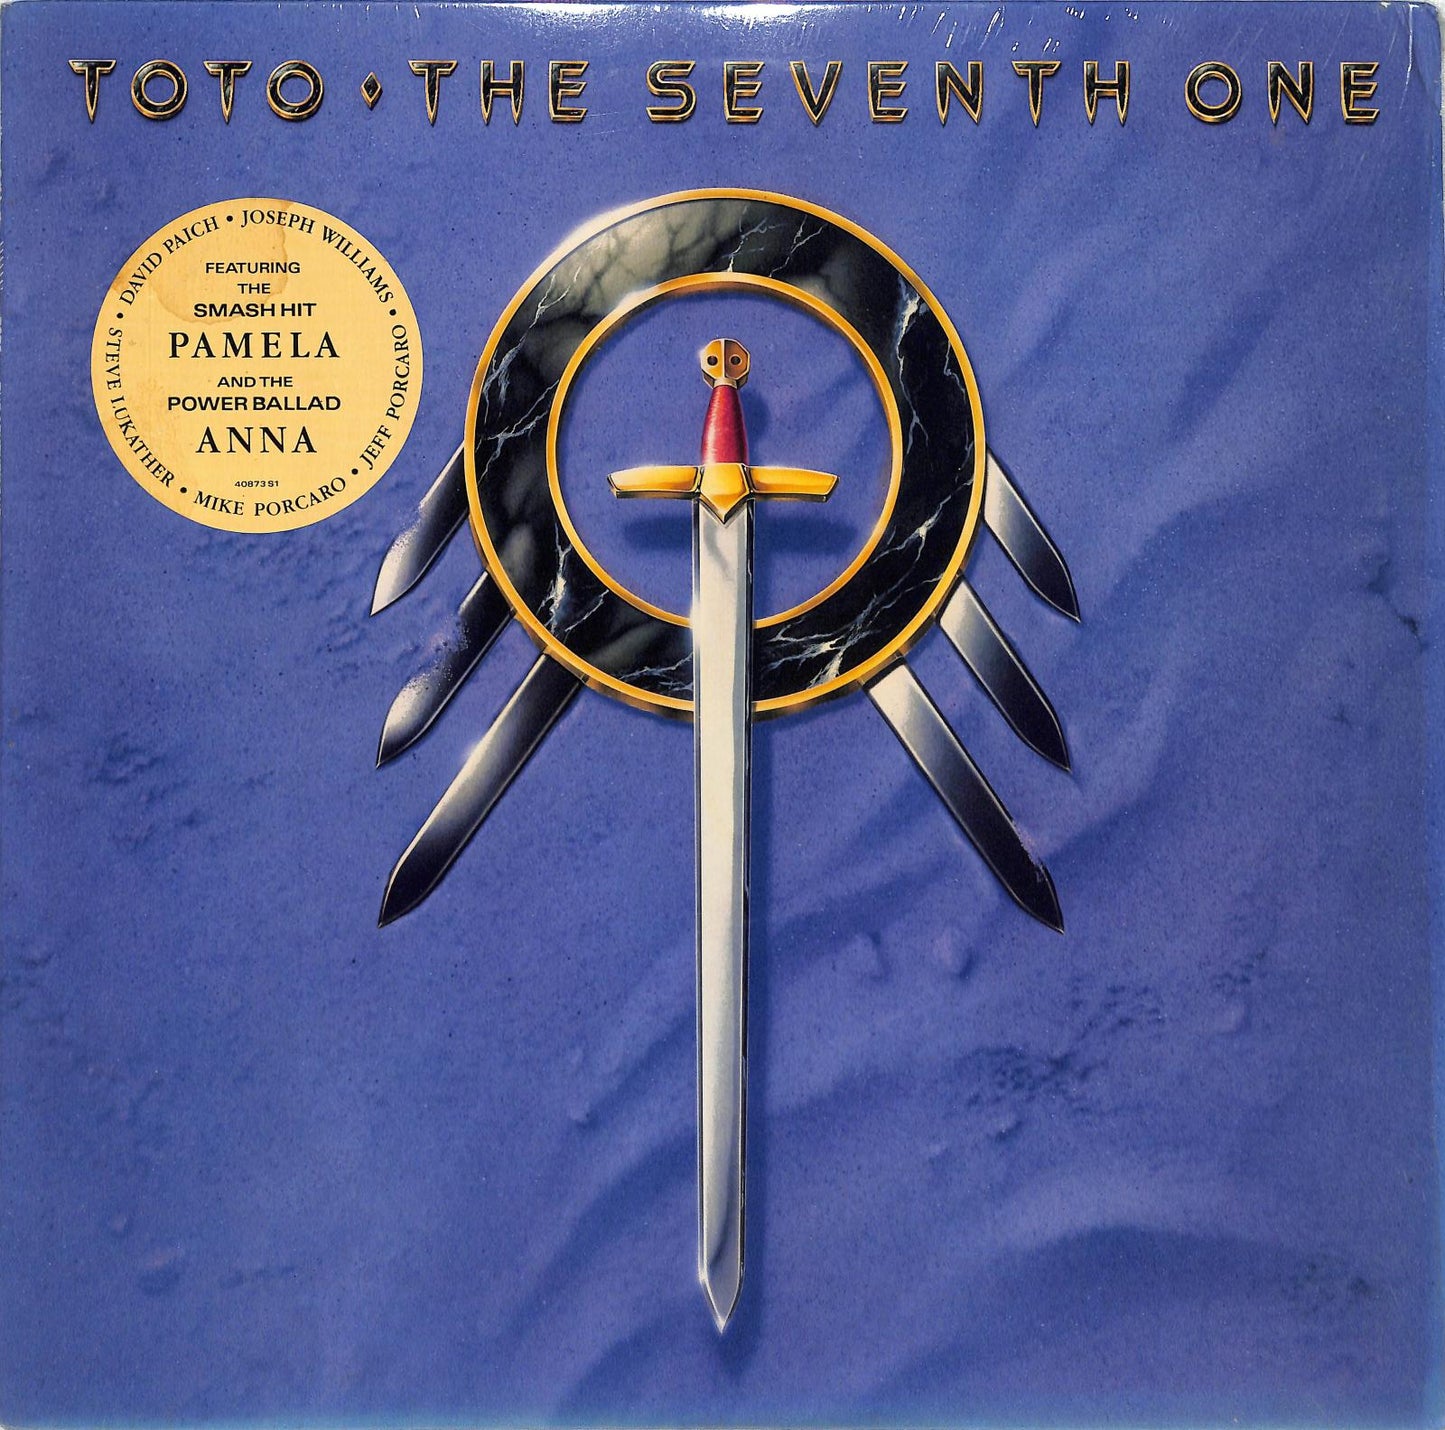 TOTO - The Seventh One